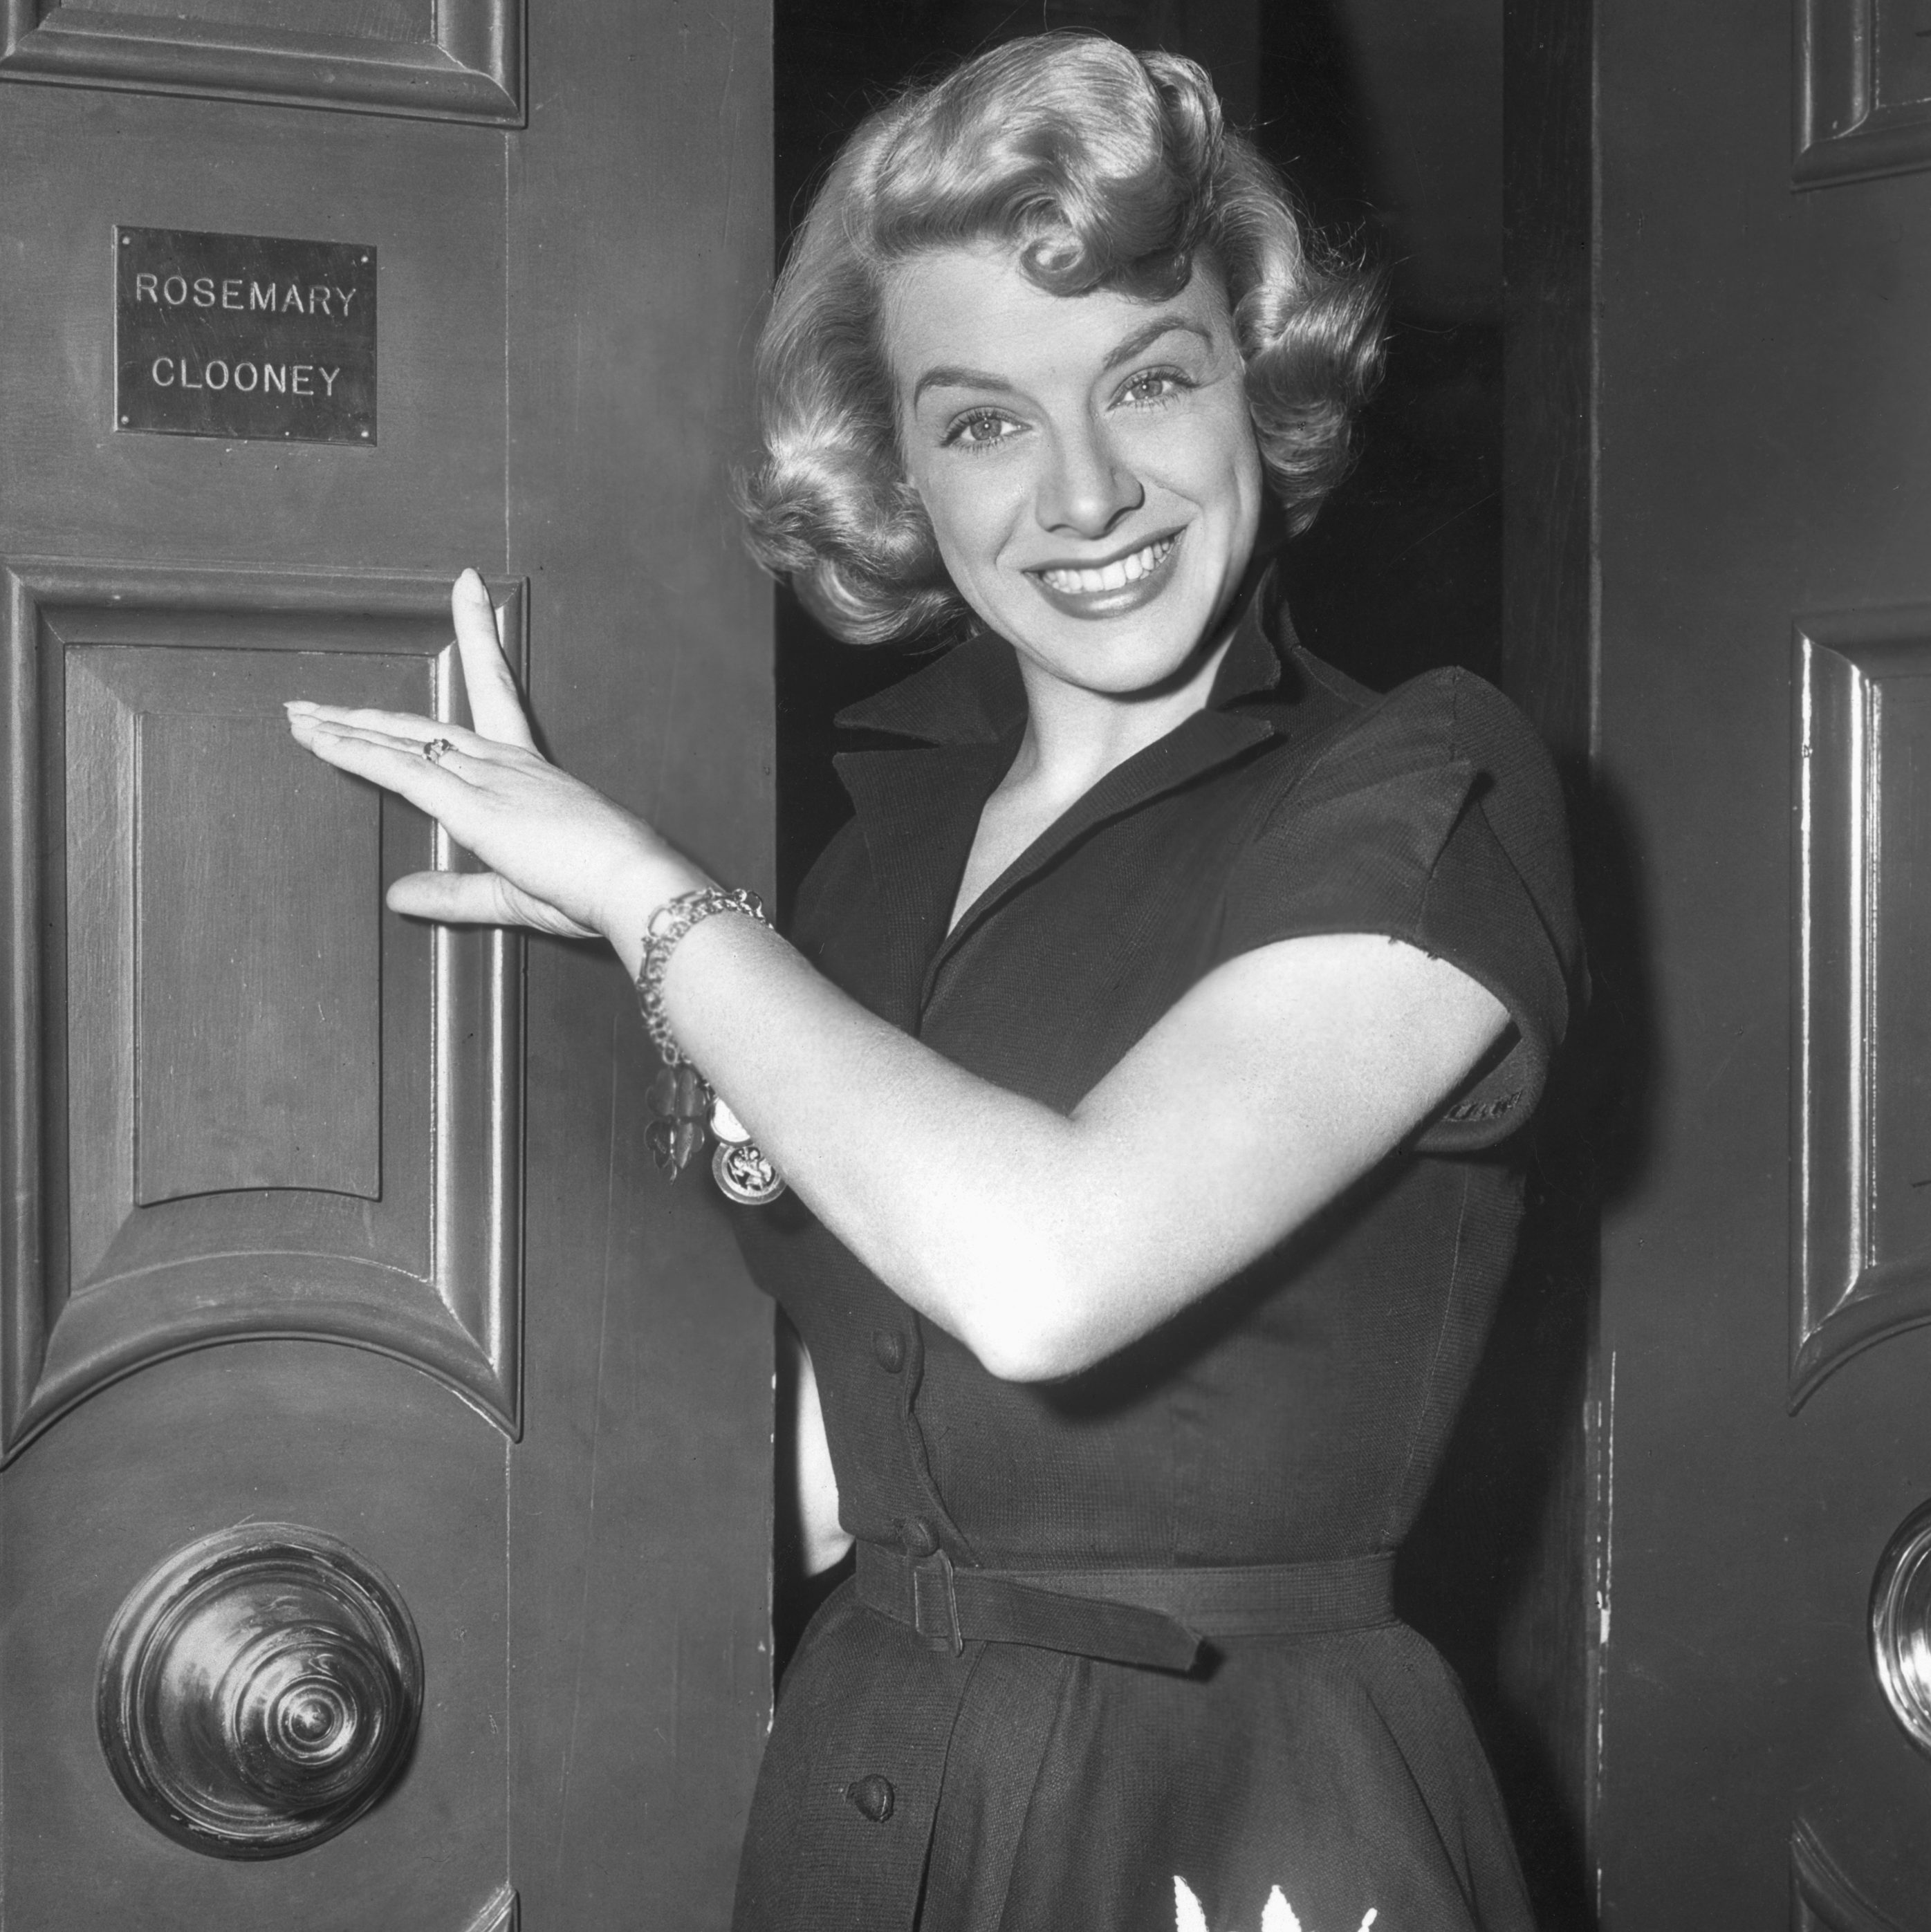 Rosemary Clooney points to her nameplate on a door, 1945